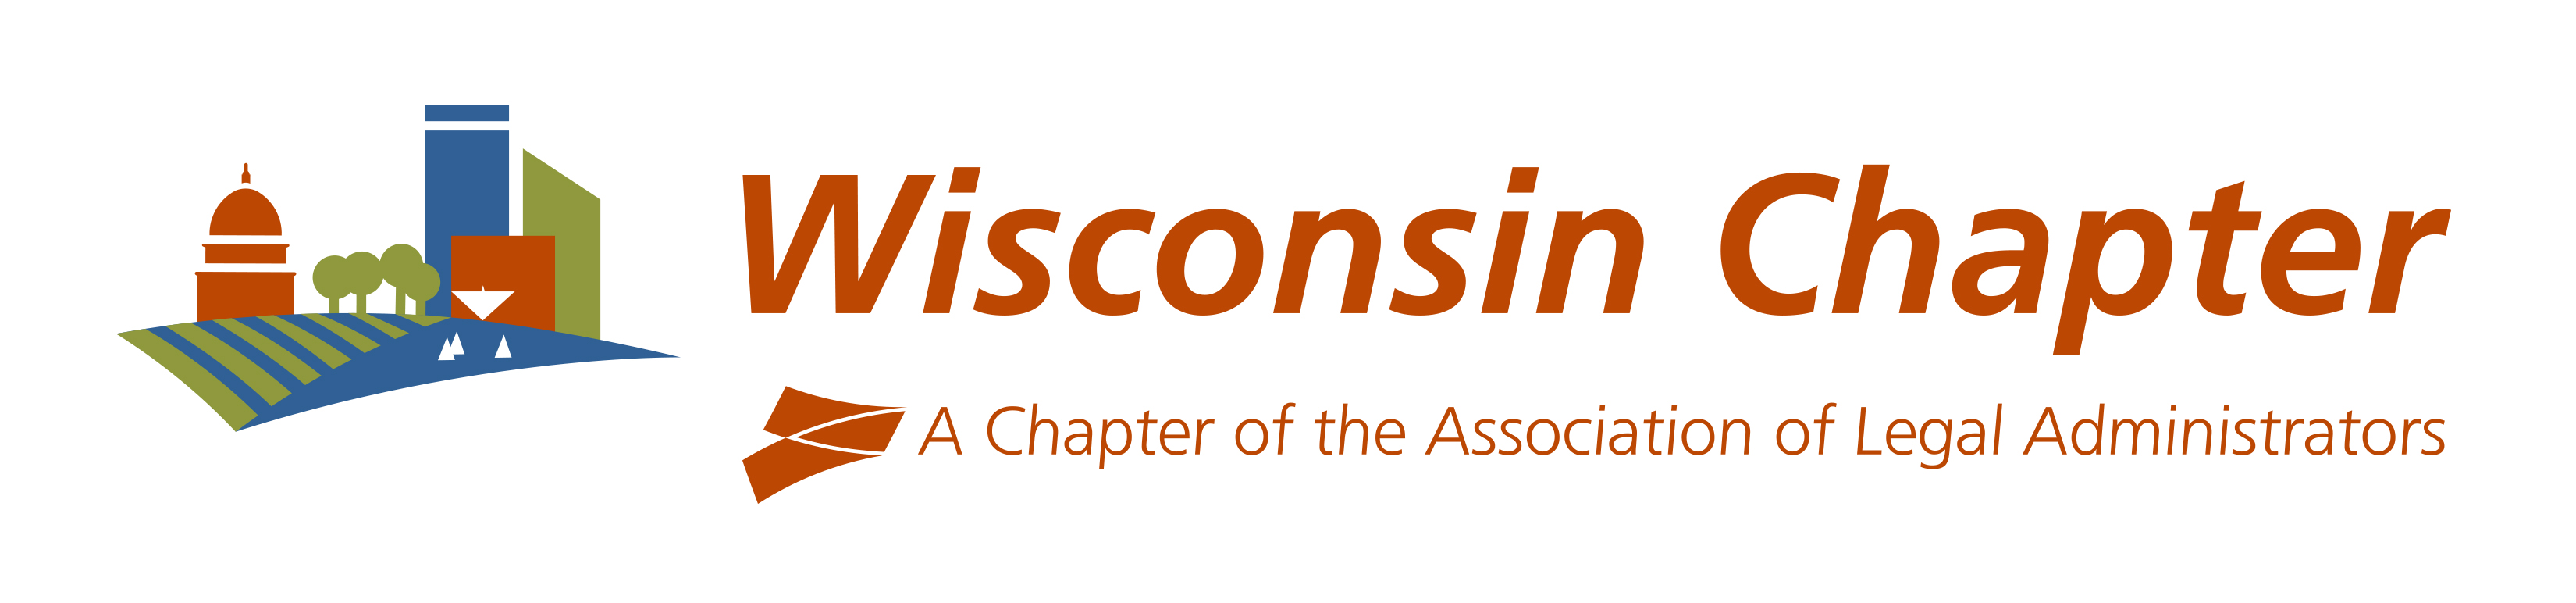 Wisconsin Chapter of the Association of Legal Administrators